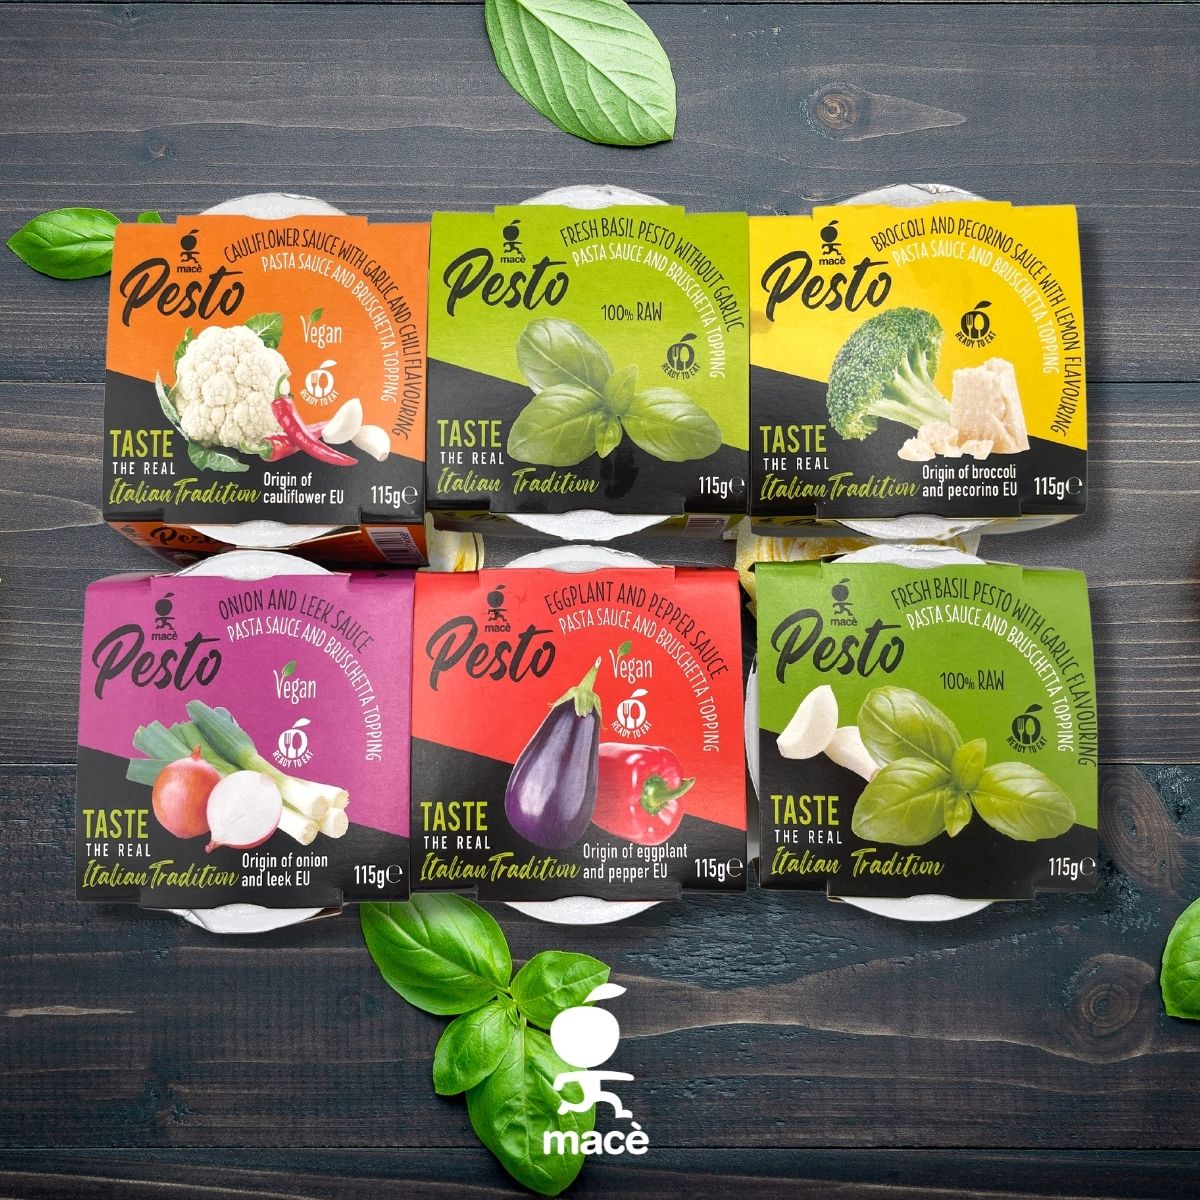   Traduzione  Seleziona lingua di arrivo Inglese (GB)  Macé's entire line of pestos and HPP sauces: Genovese pesto with and without garlic, pepper and eggplant sauce, cauliflower garlic and chilli sauce, broccoli and pecorino sauce, onion and leek sauce